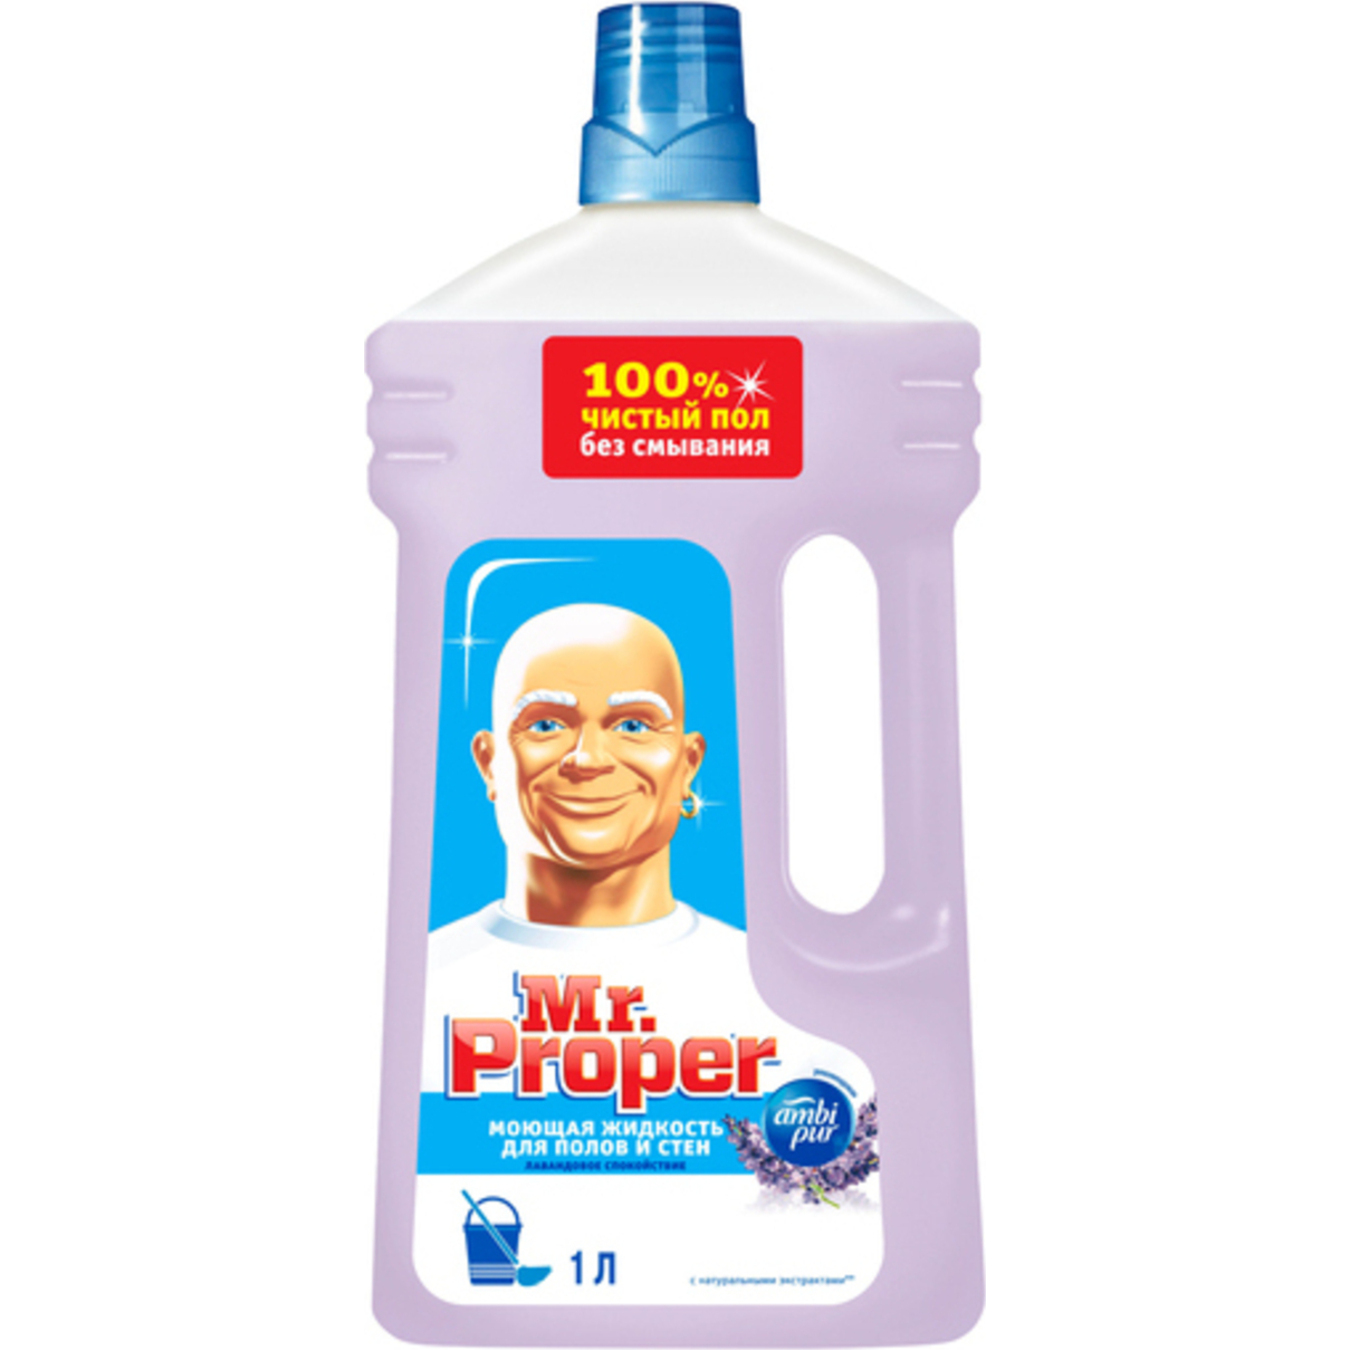 Washing liquid Mr. Proper Lavender peace for the floor and walls 1l